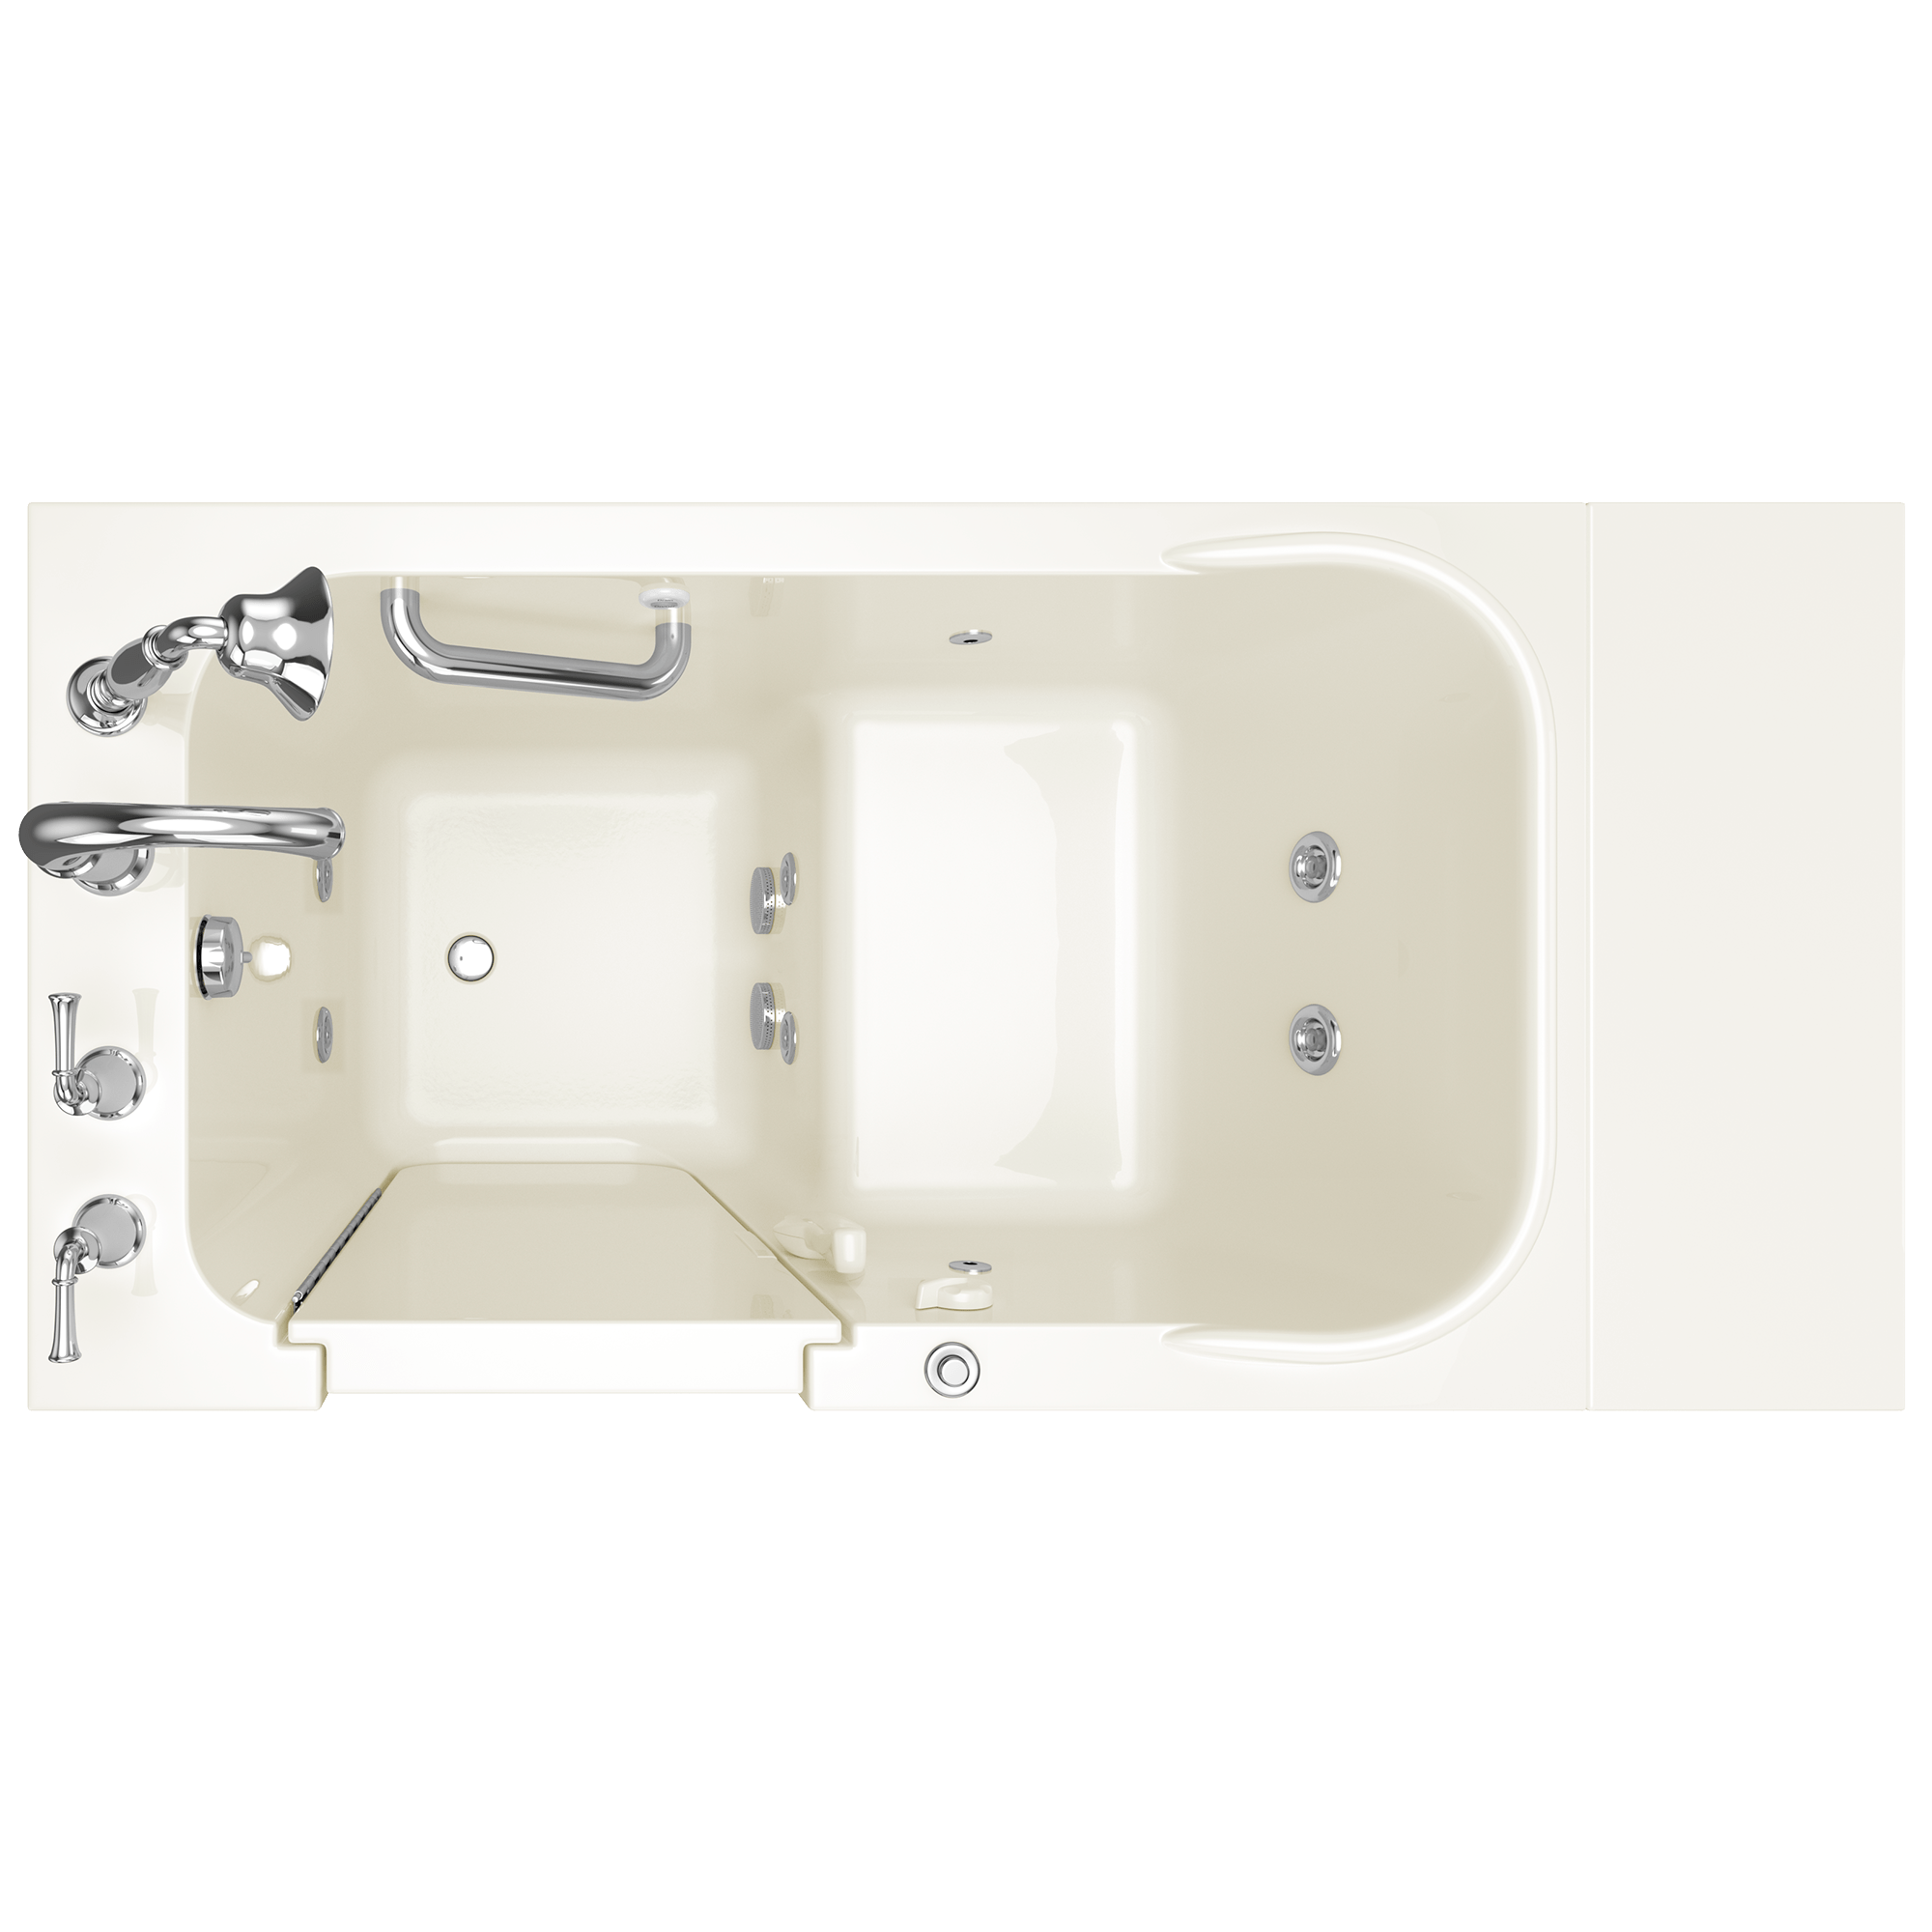 Gelcoat Value Series 28x48-inch Walk-in Bathtub with Whirlpool System  Left Hand Door and Drain